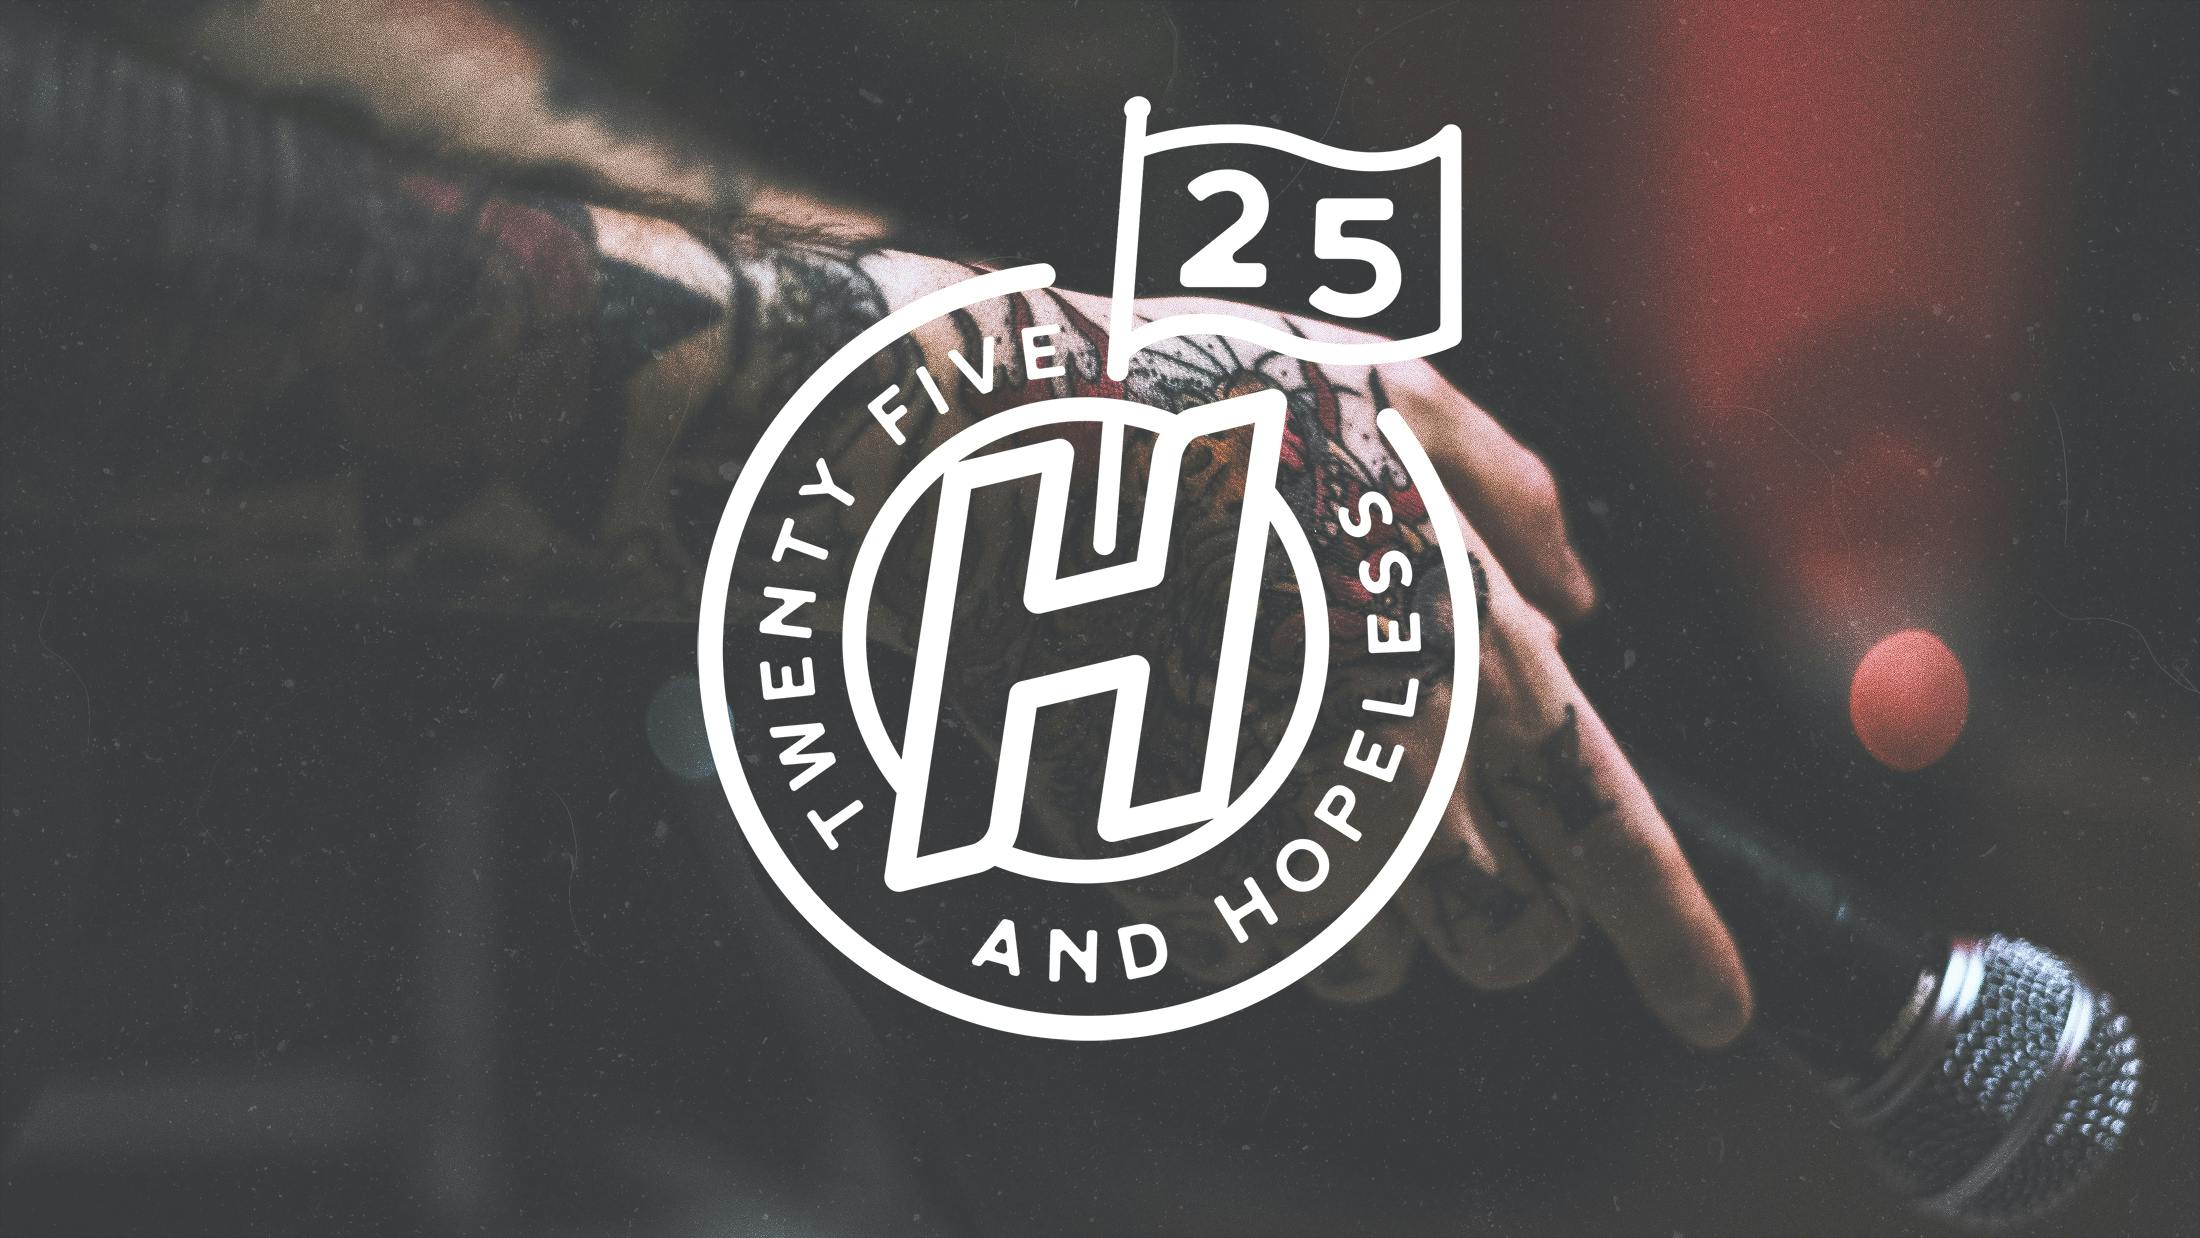 11 Things Hopeless Records Has Taught Us Over The Past 25 Years